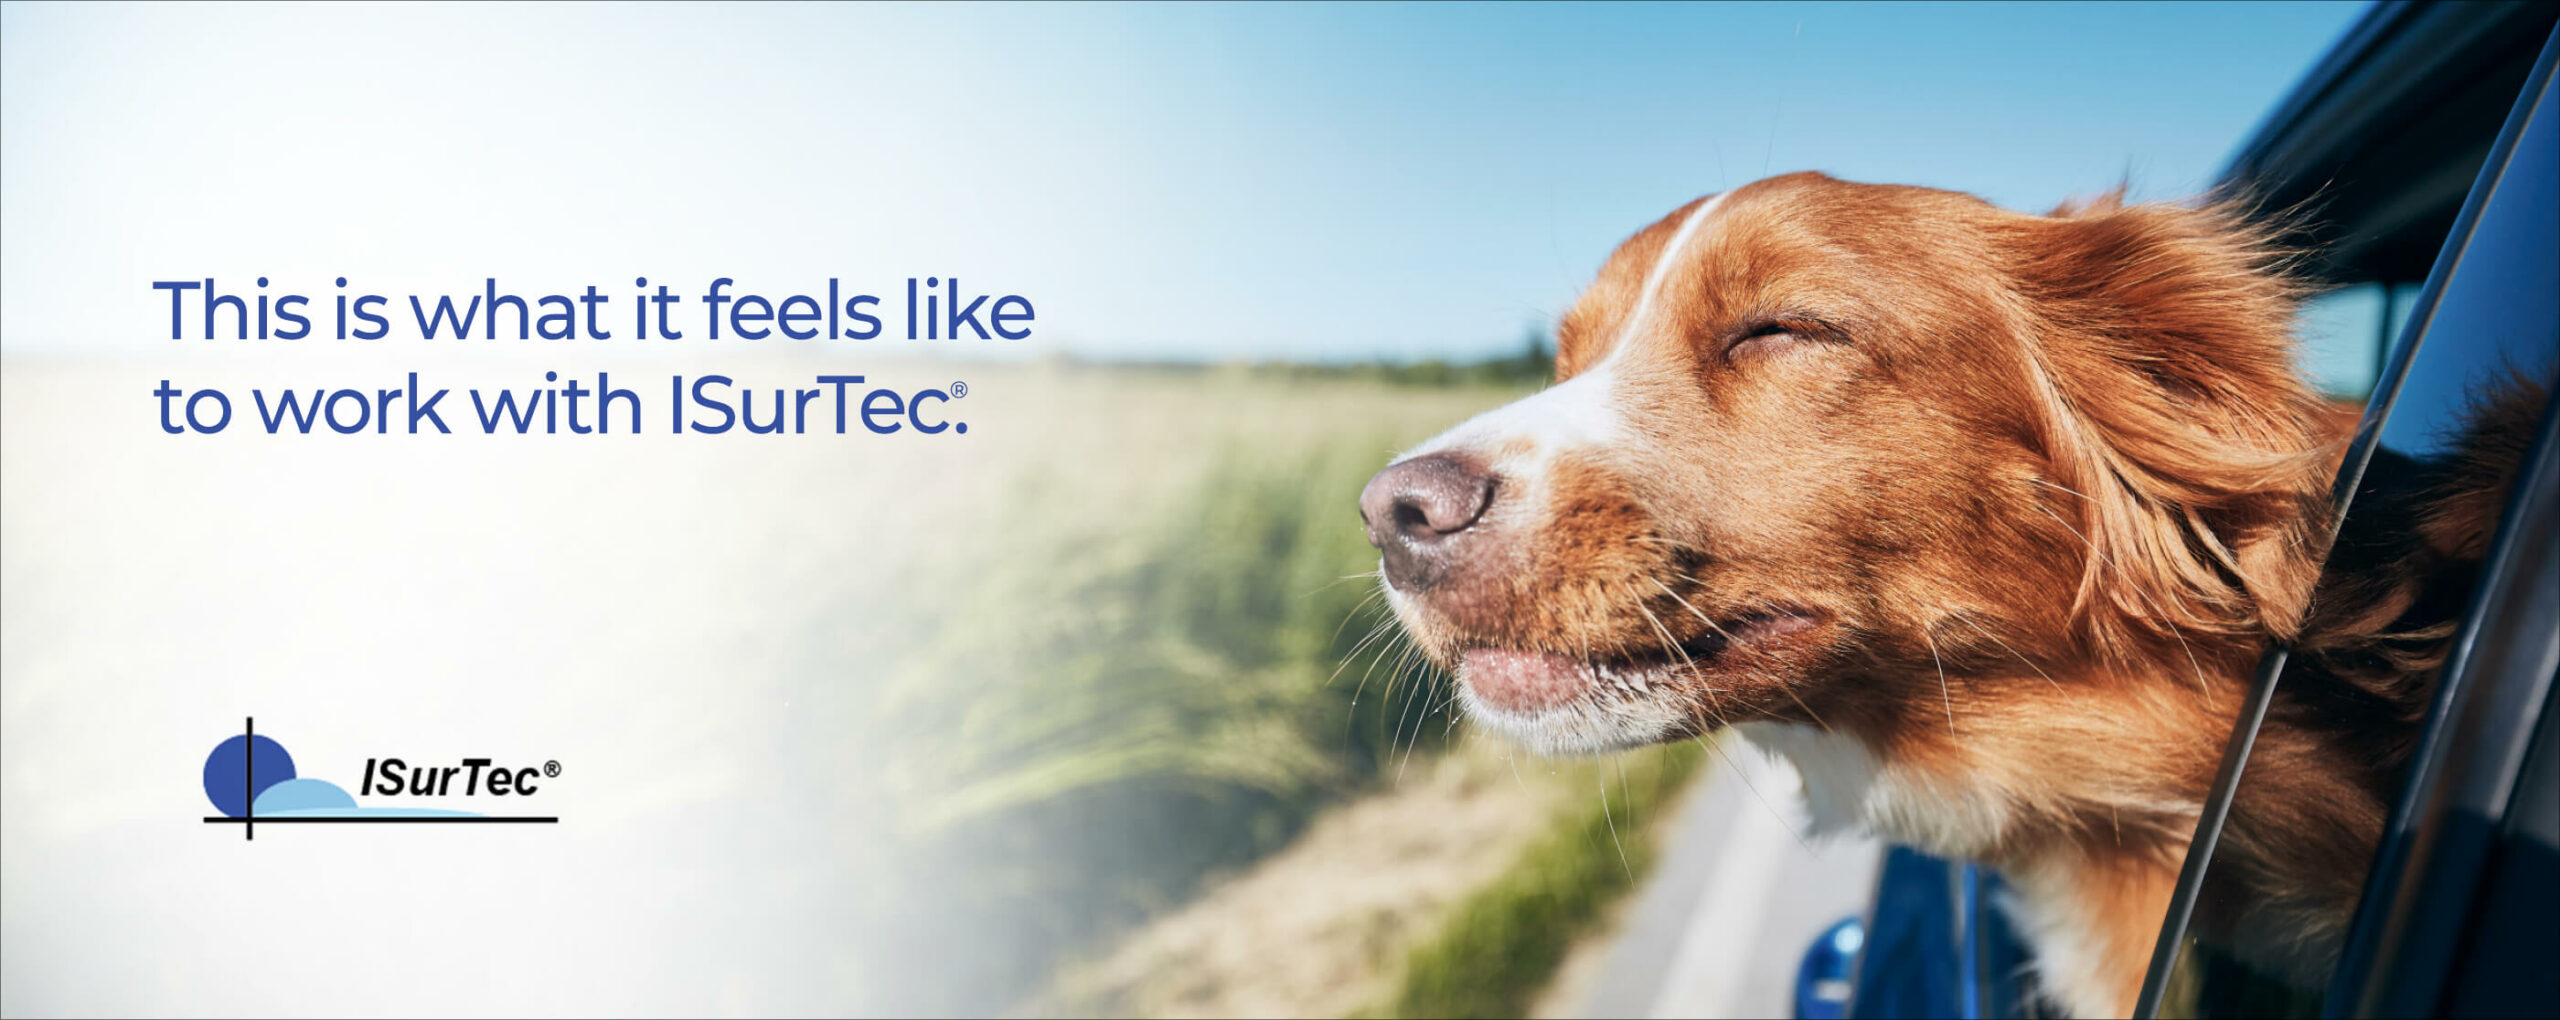 text: This is what it feels like to work with ISurTec®. IMage: is a photograph of a dog sticking its head out of a moving car window, seemingly smiling. ISurTec® logo sits in bottom left.